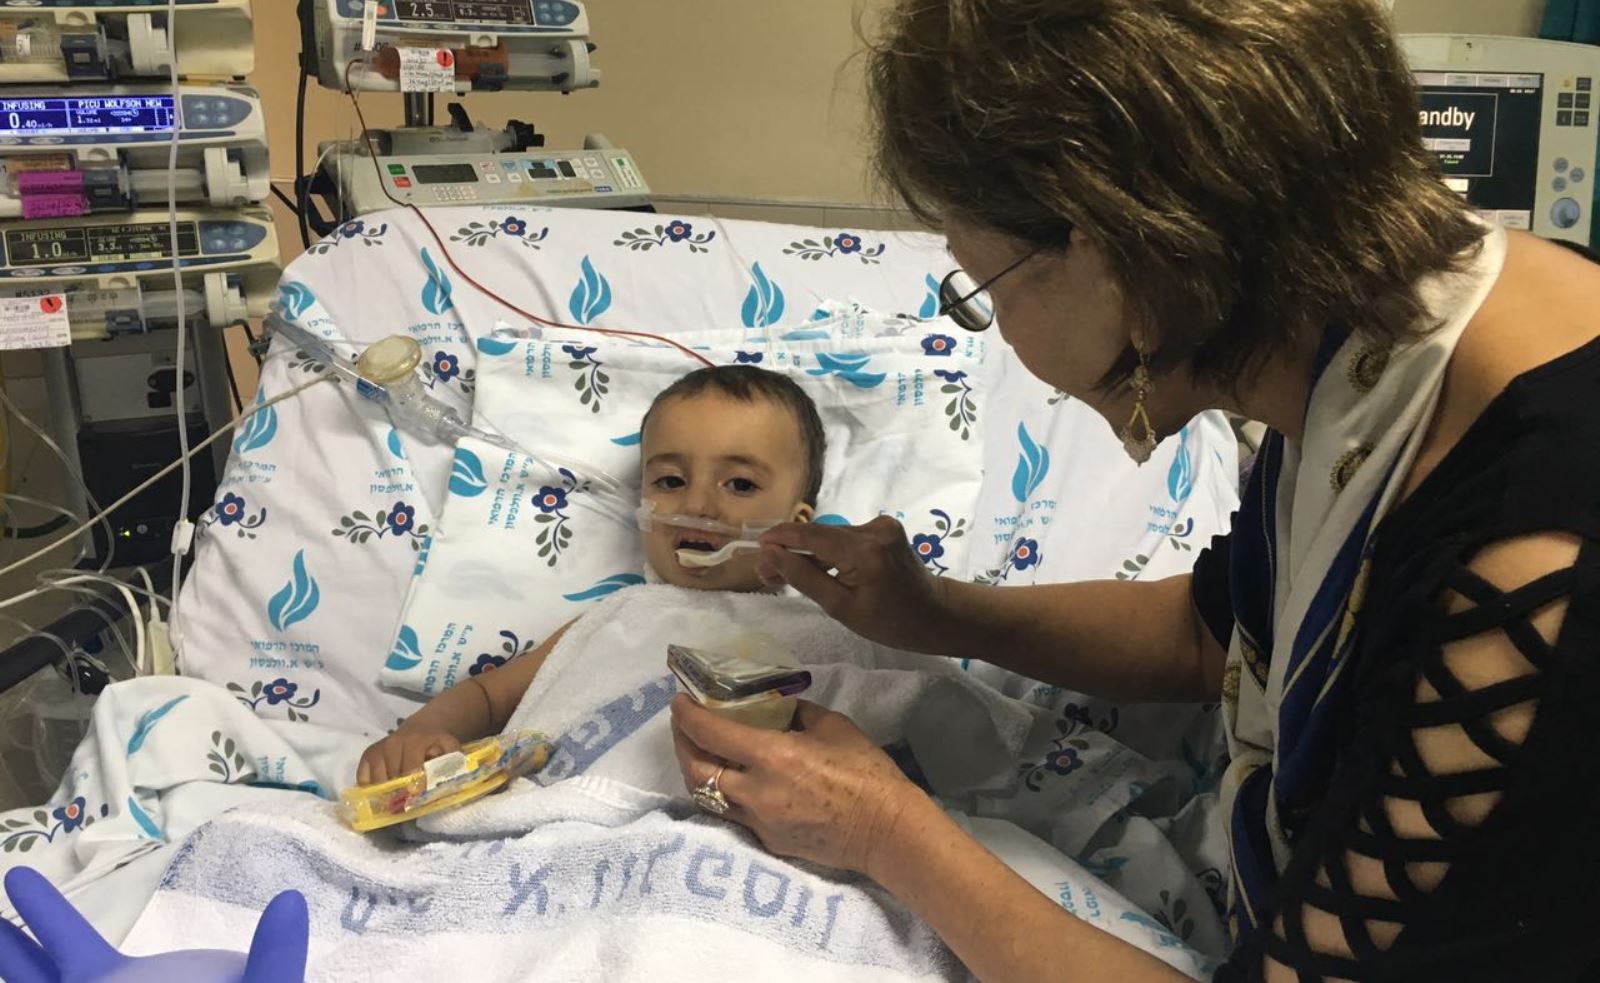 California Rotary Club member Fary Moini, formerly a cardiology nurse from Iran, volunteered to care of Yehia. Photo courtesy of SACH 